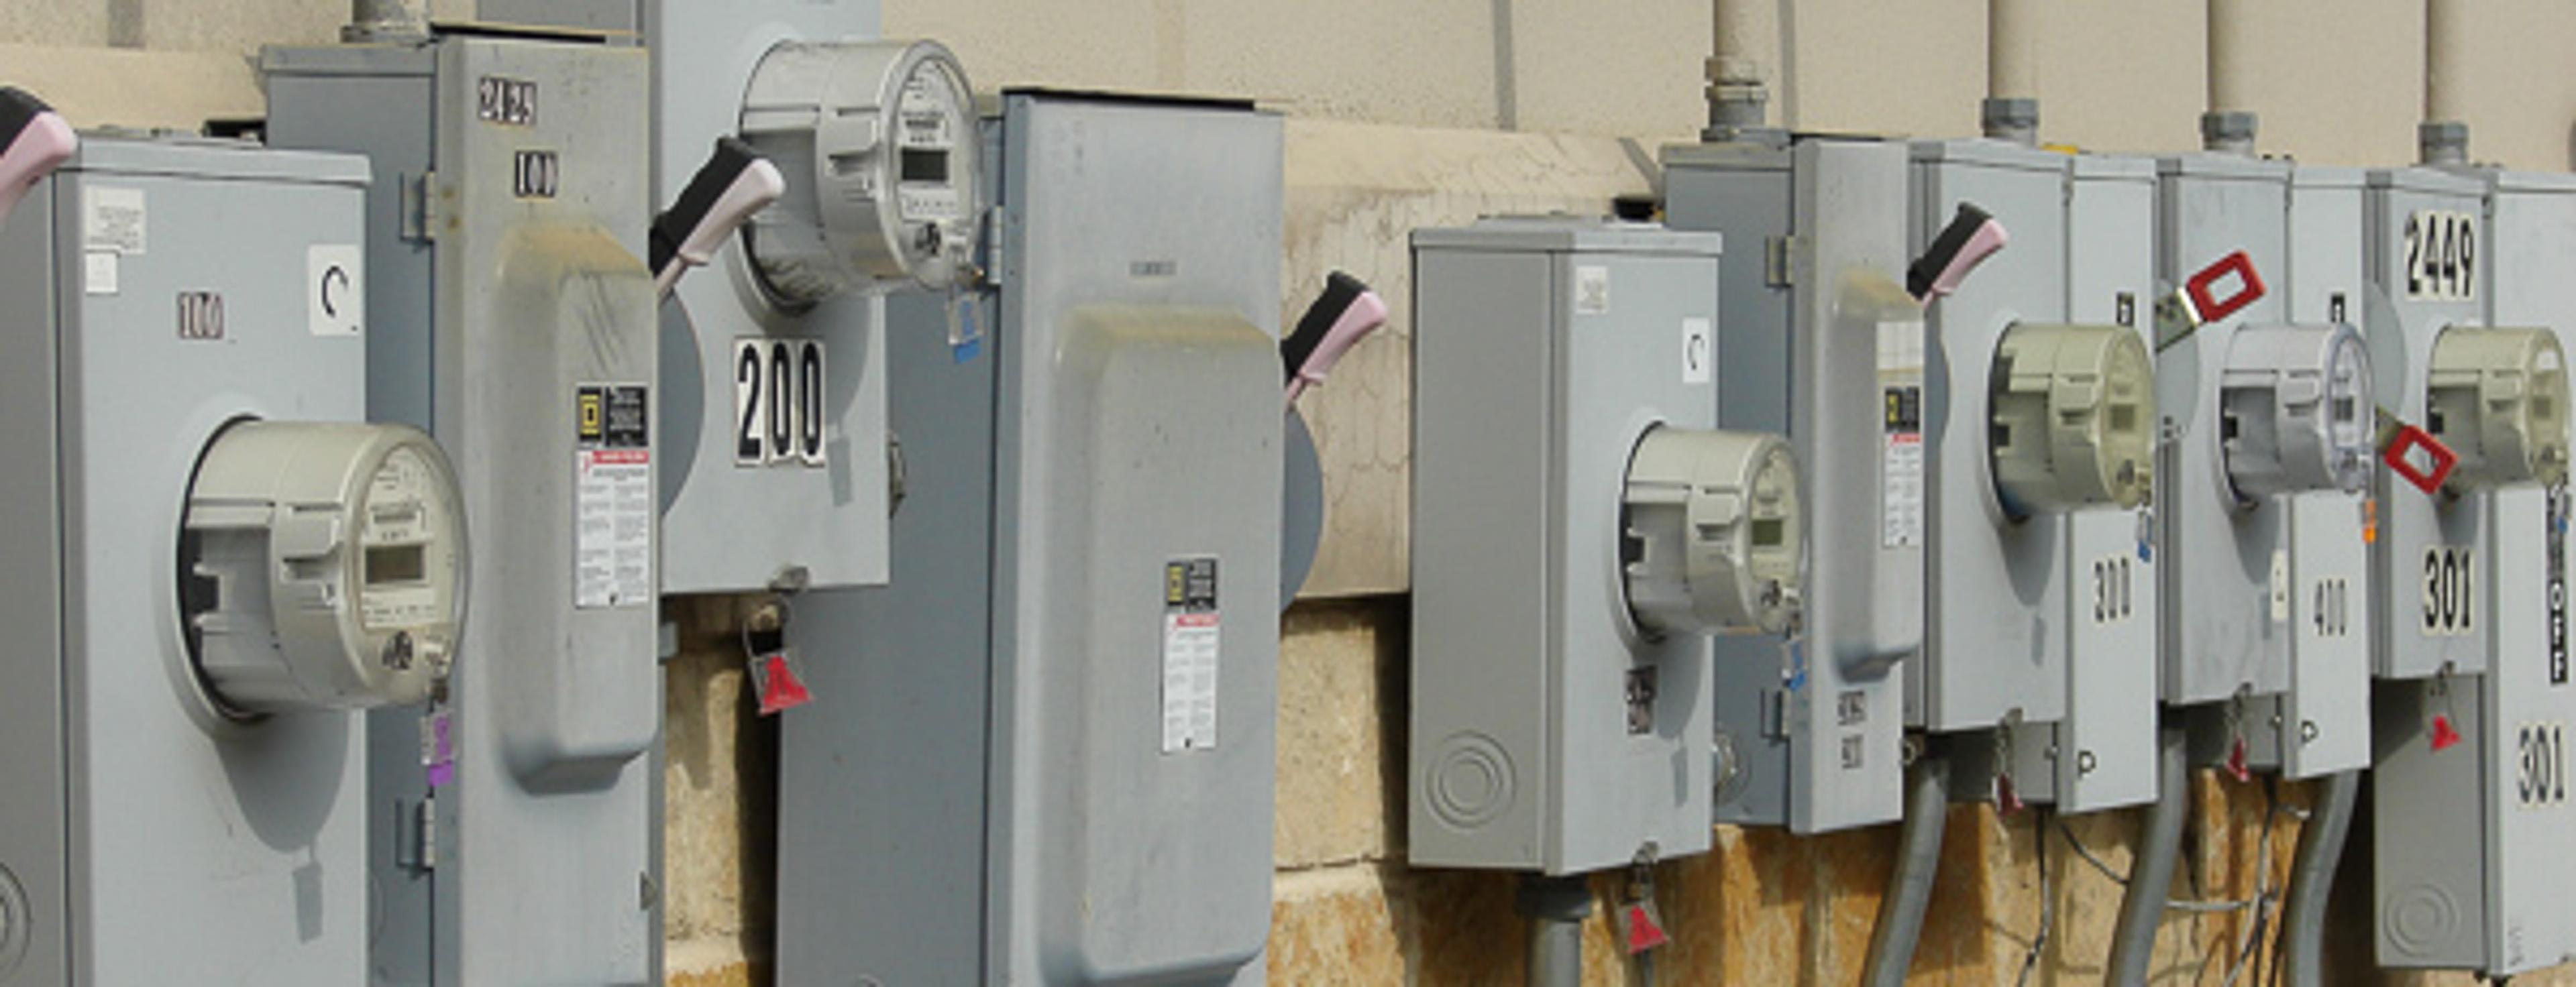 Electical utility meters